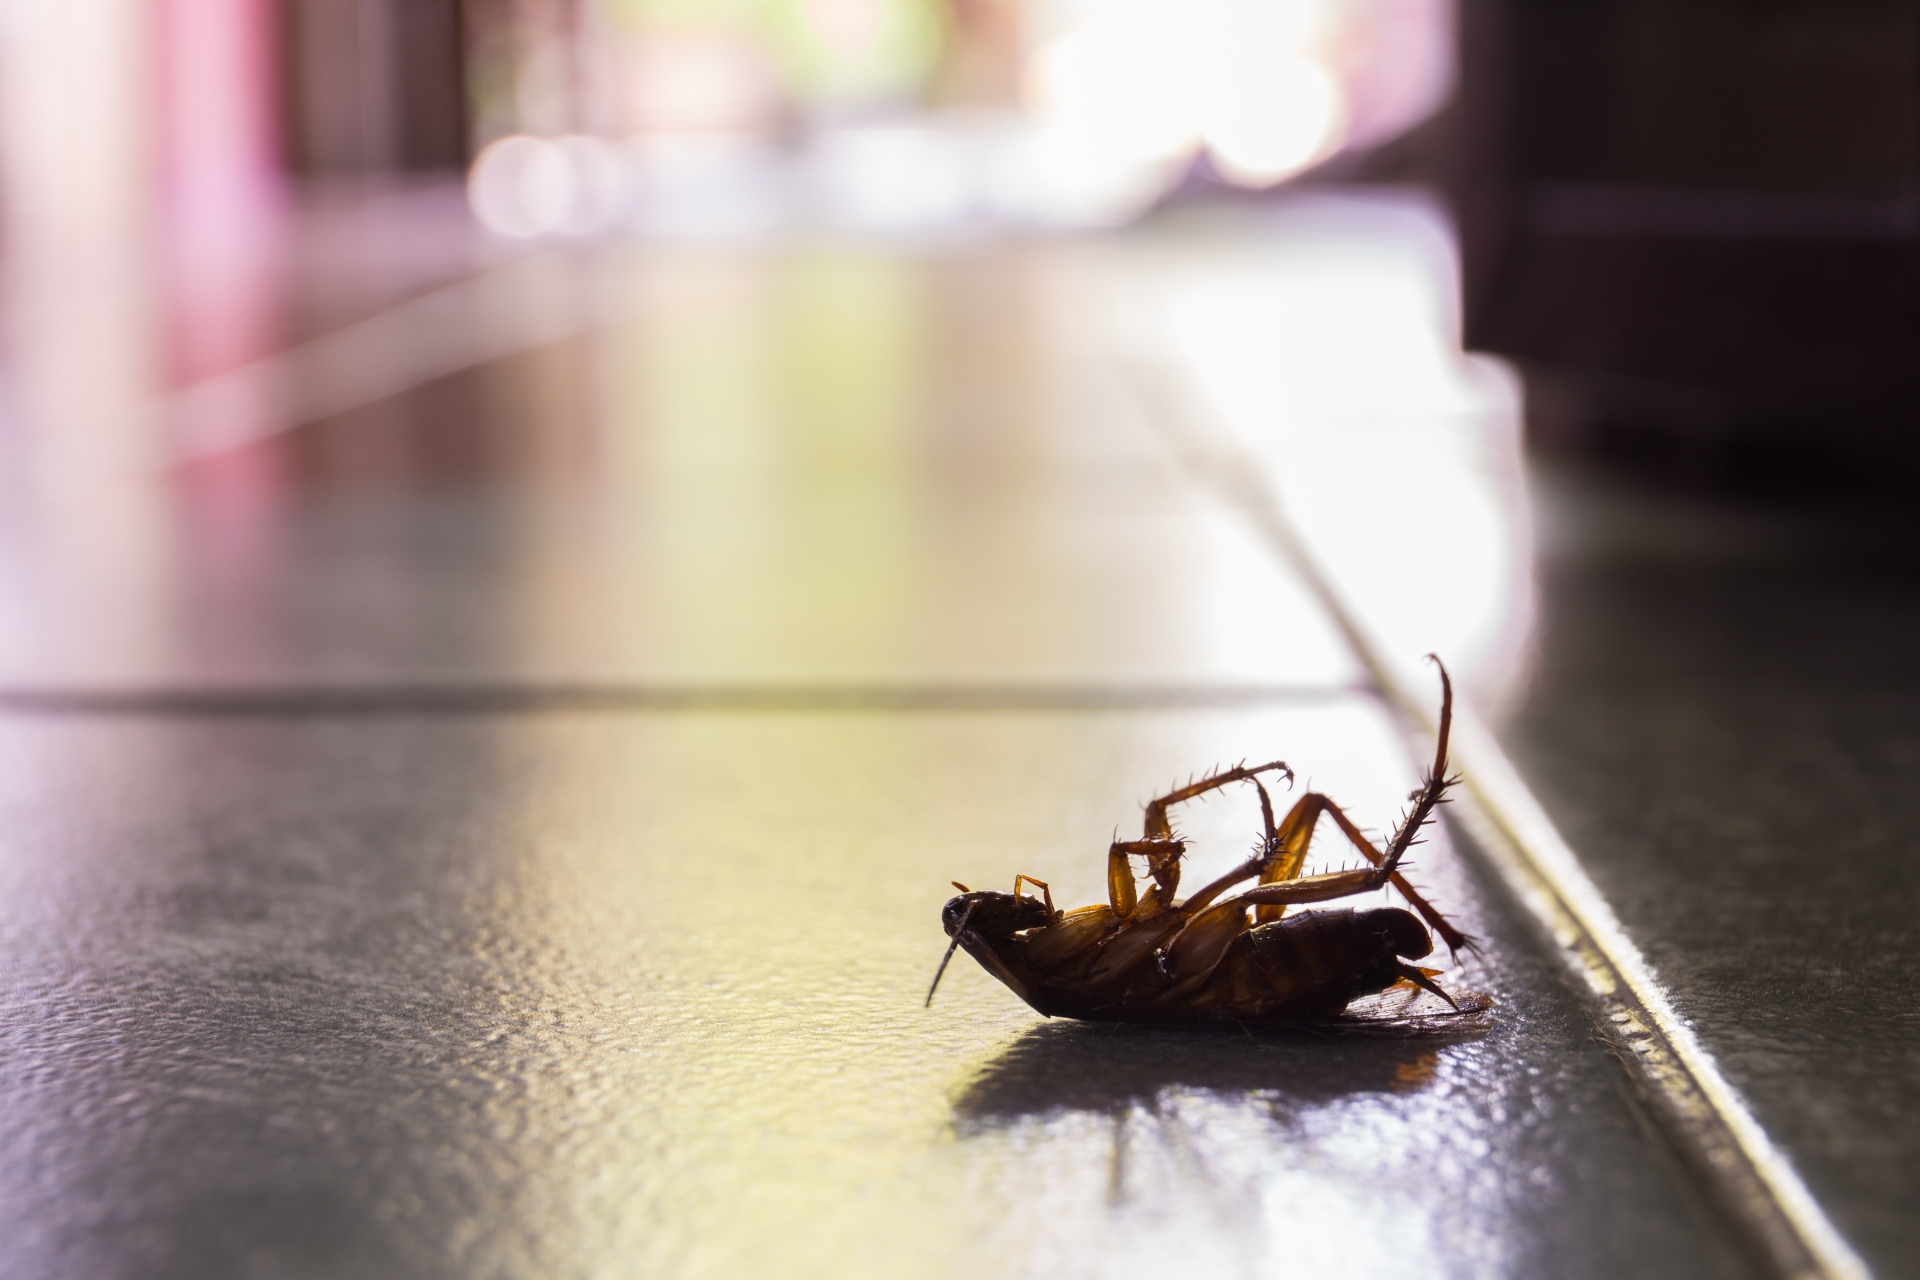 Cockroach Control, Pest Control in Lewisham, SE13. Call Now 020 8166 9746